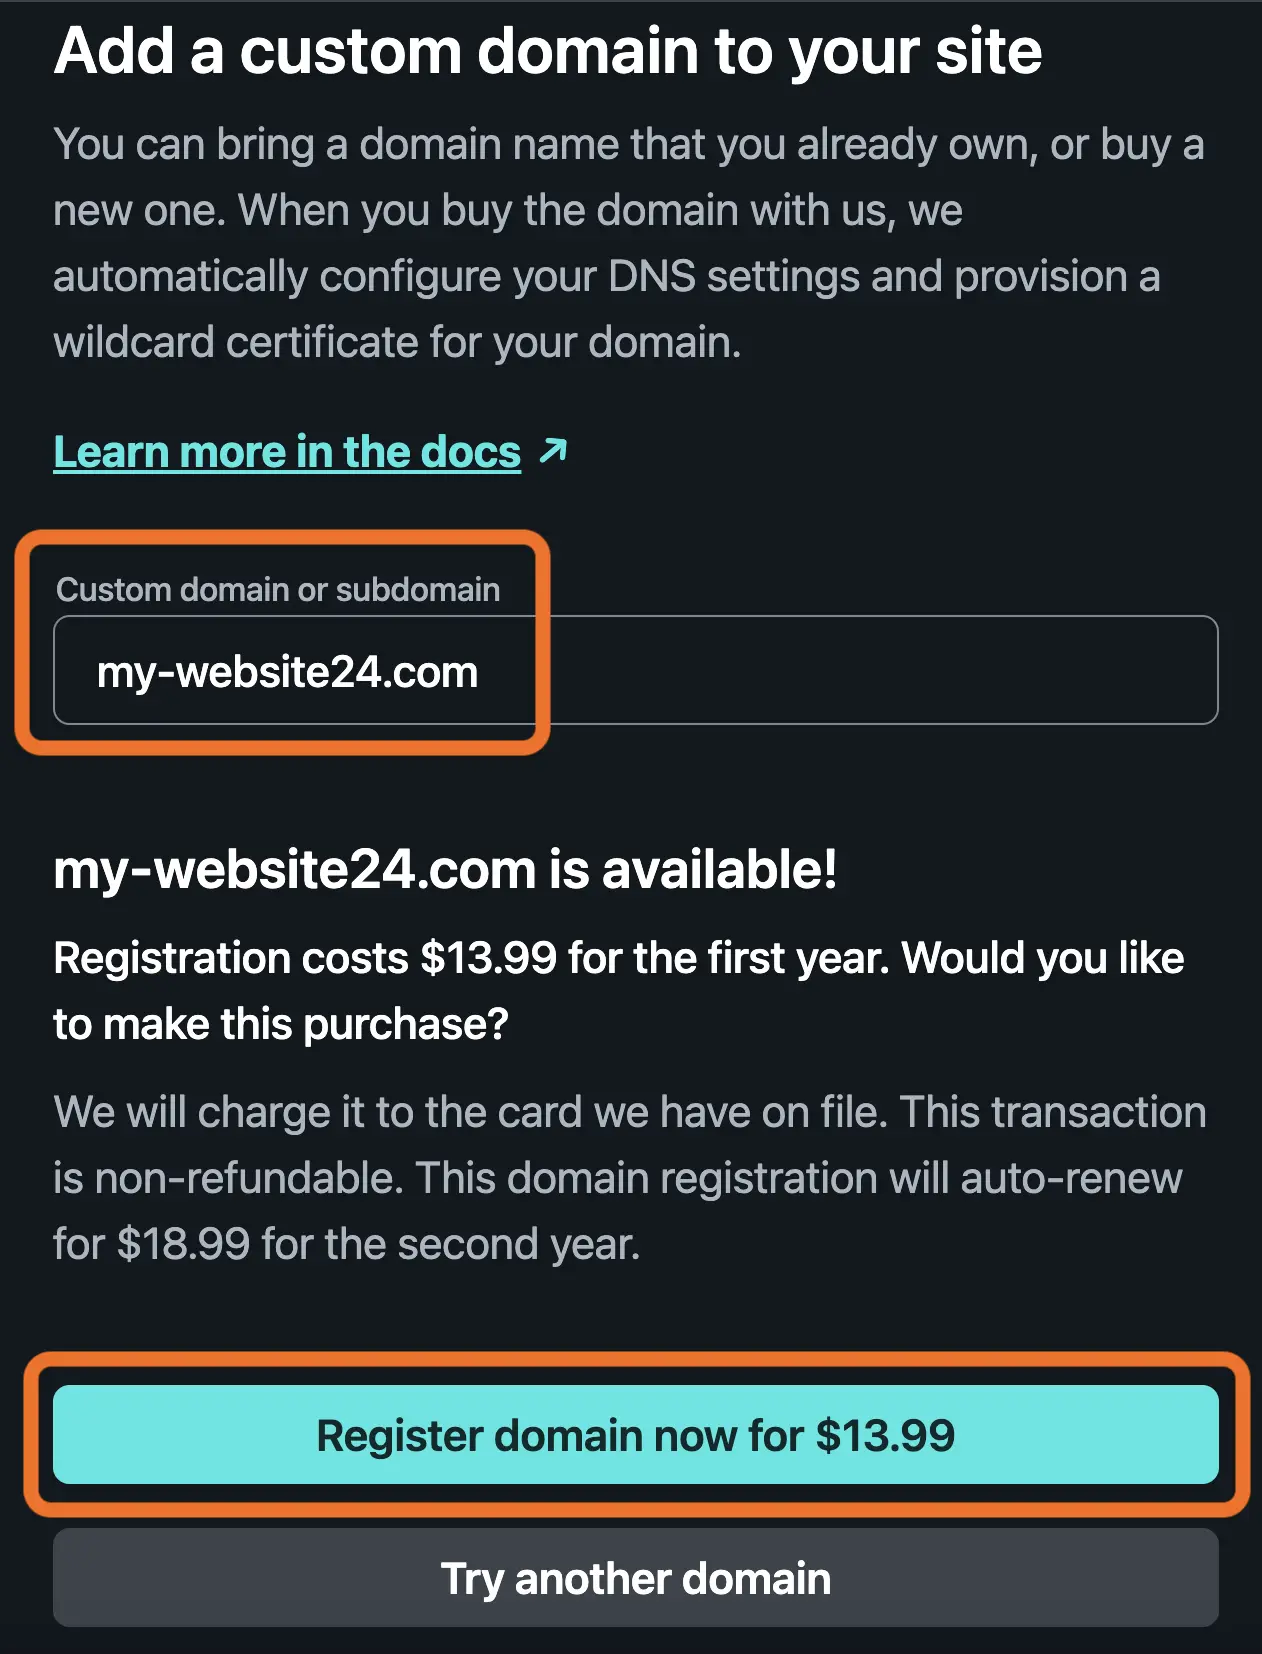 Add a custom domain to your site page on netlify. It says my-website24.com is available and costs $13.99 for the first year.